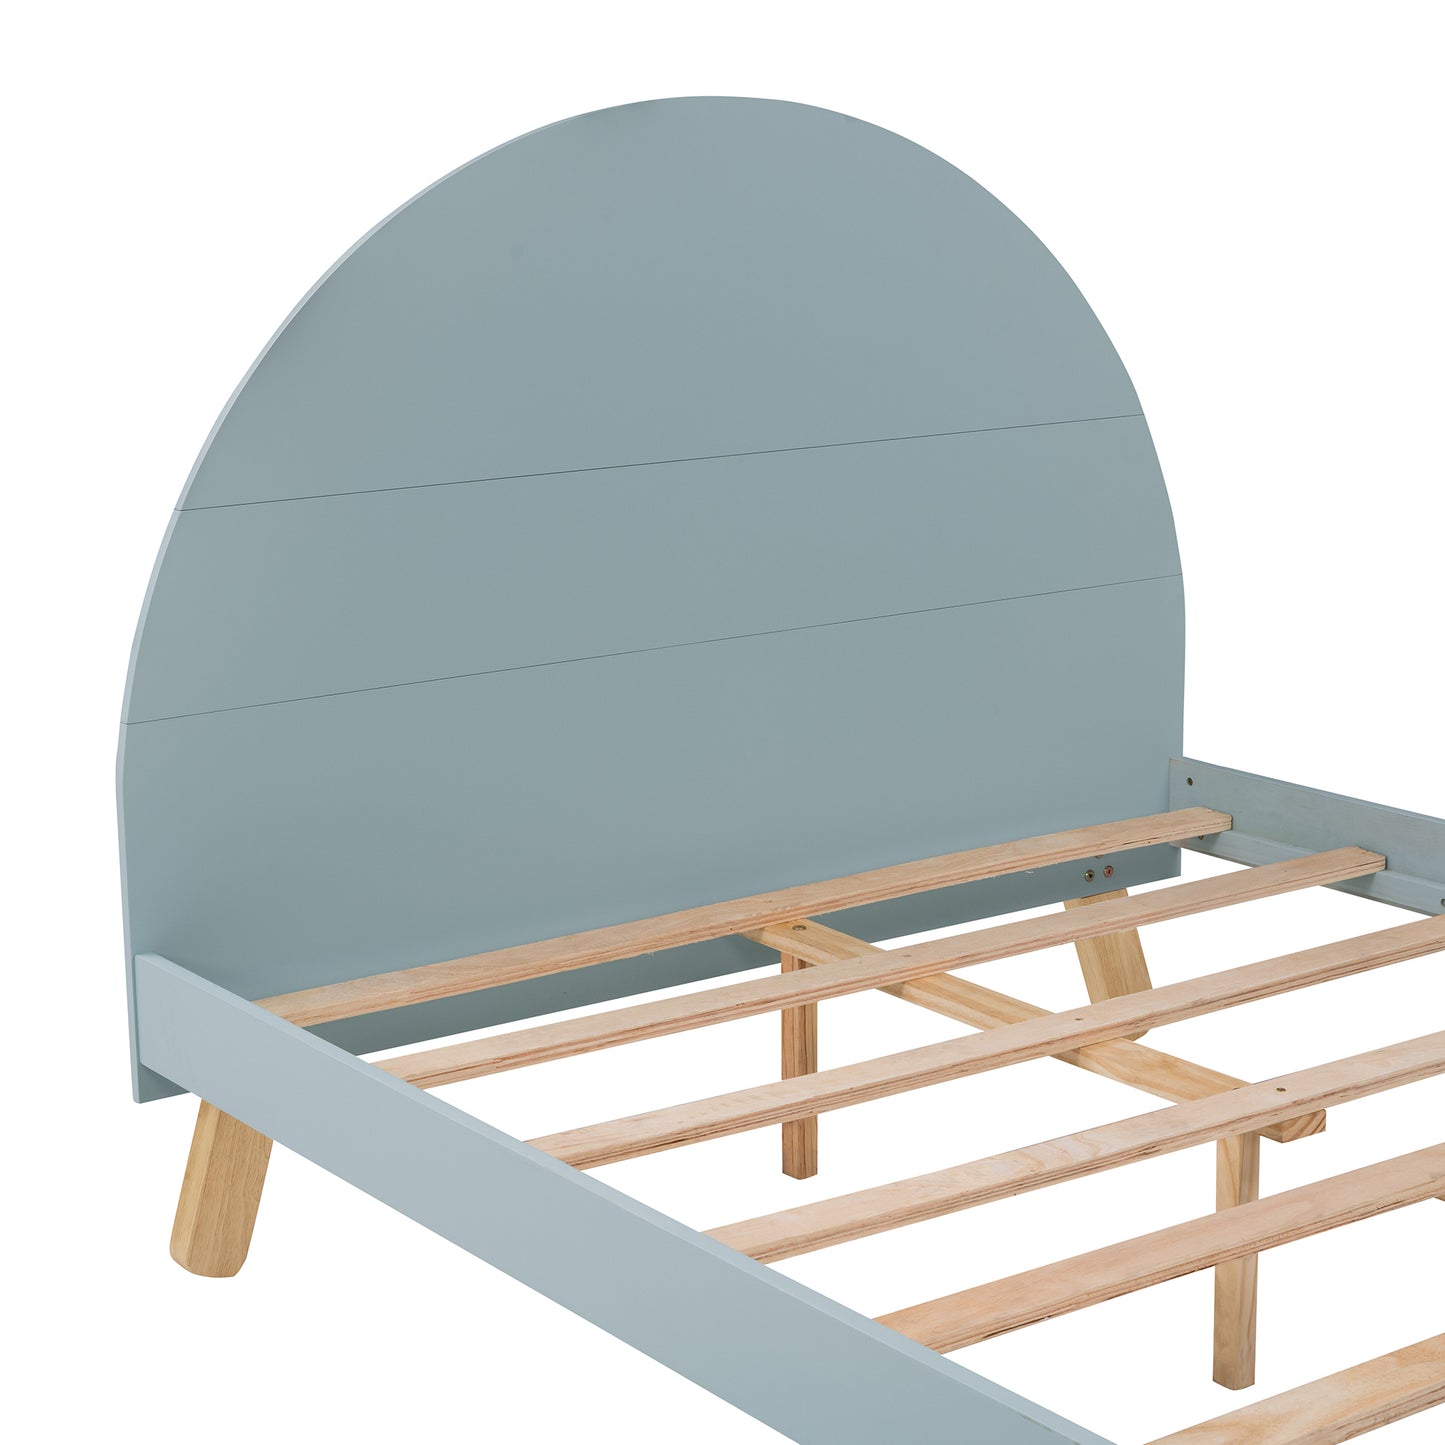 Wooden Cute Platform Bed With Curved Headboard